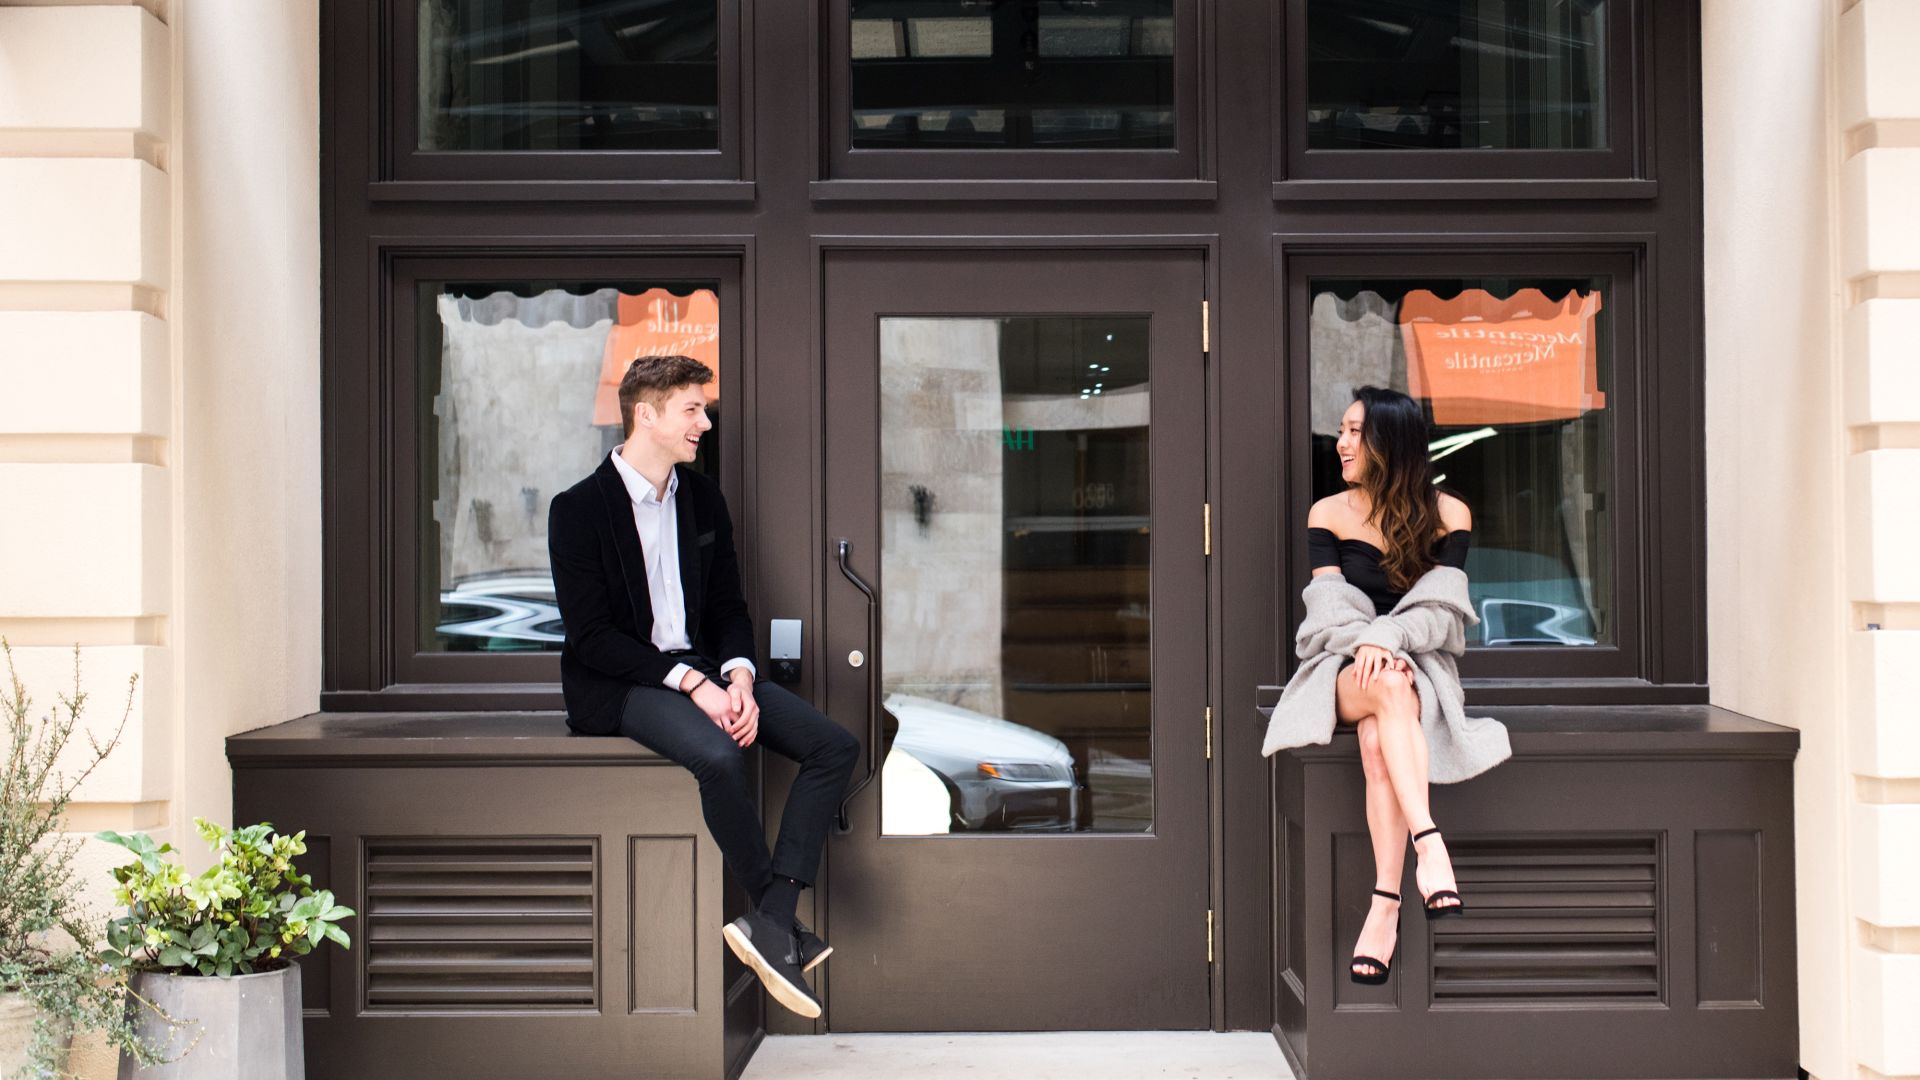 A Man And A Woman Sitting On A Bench In Front Of A Building